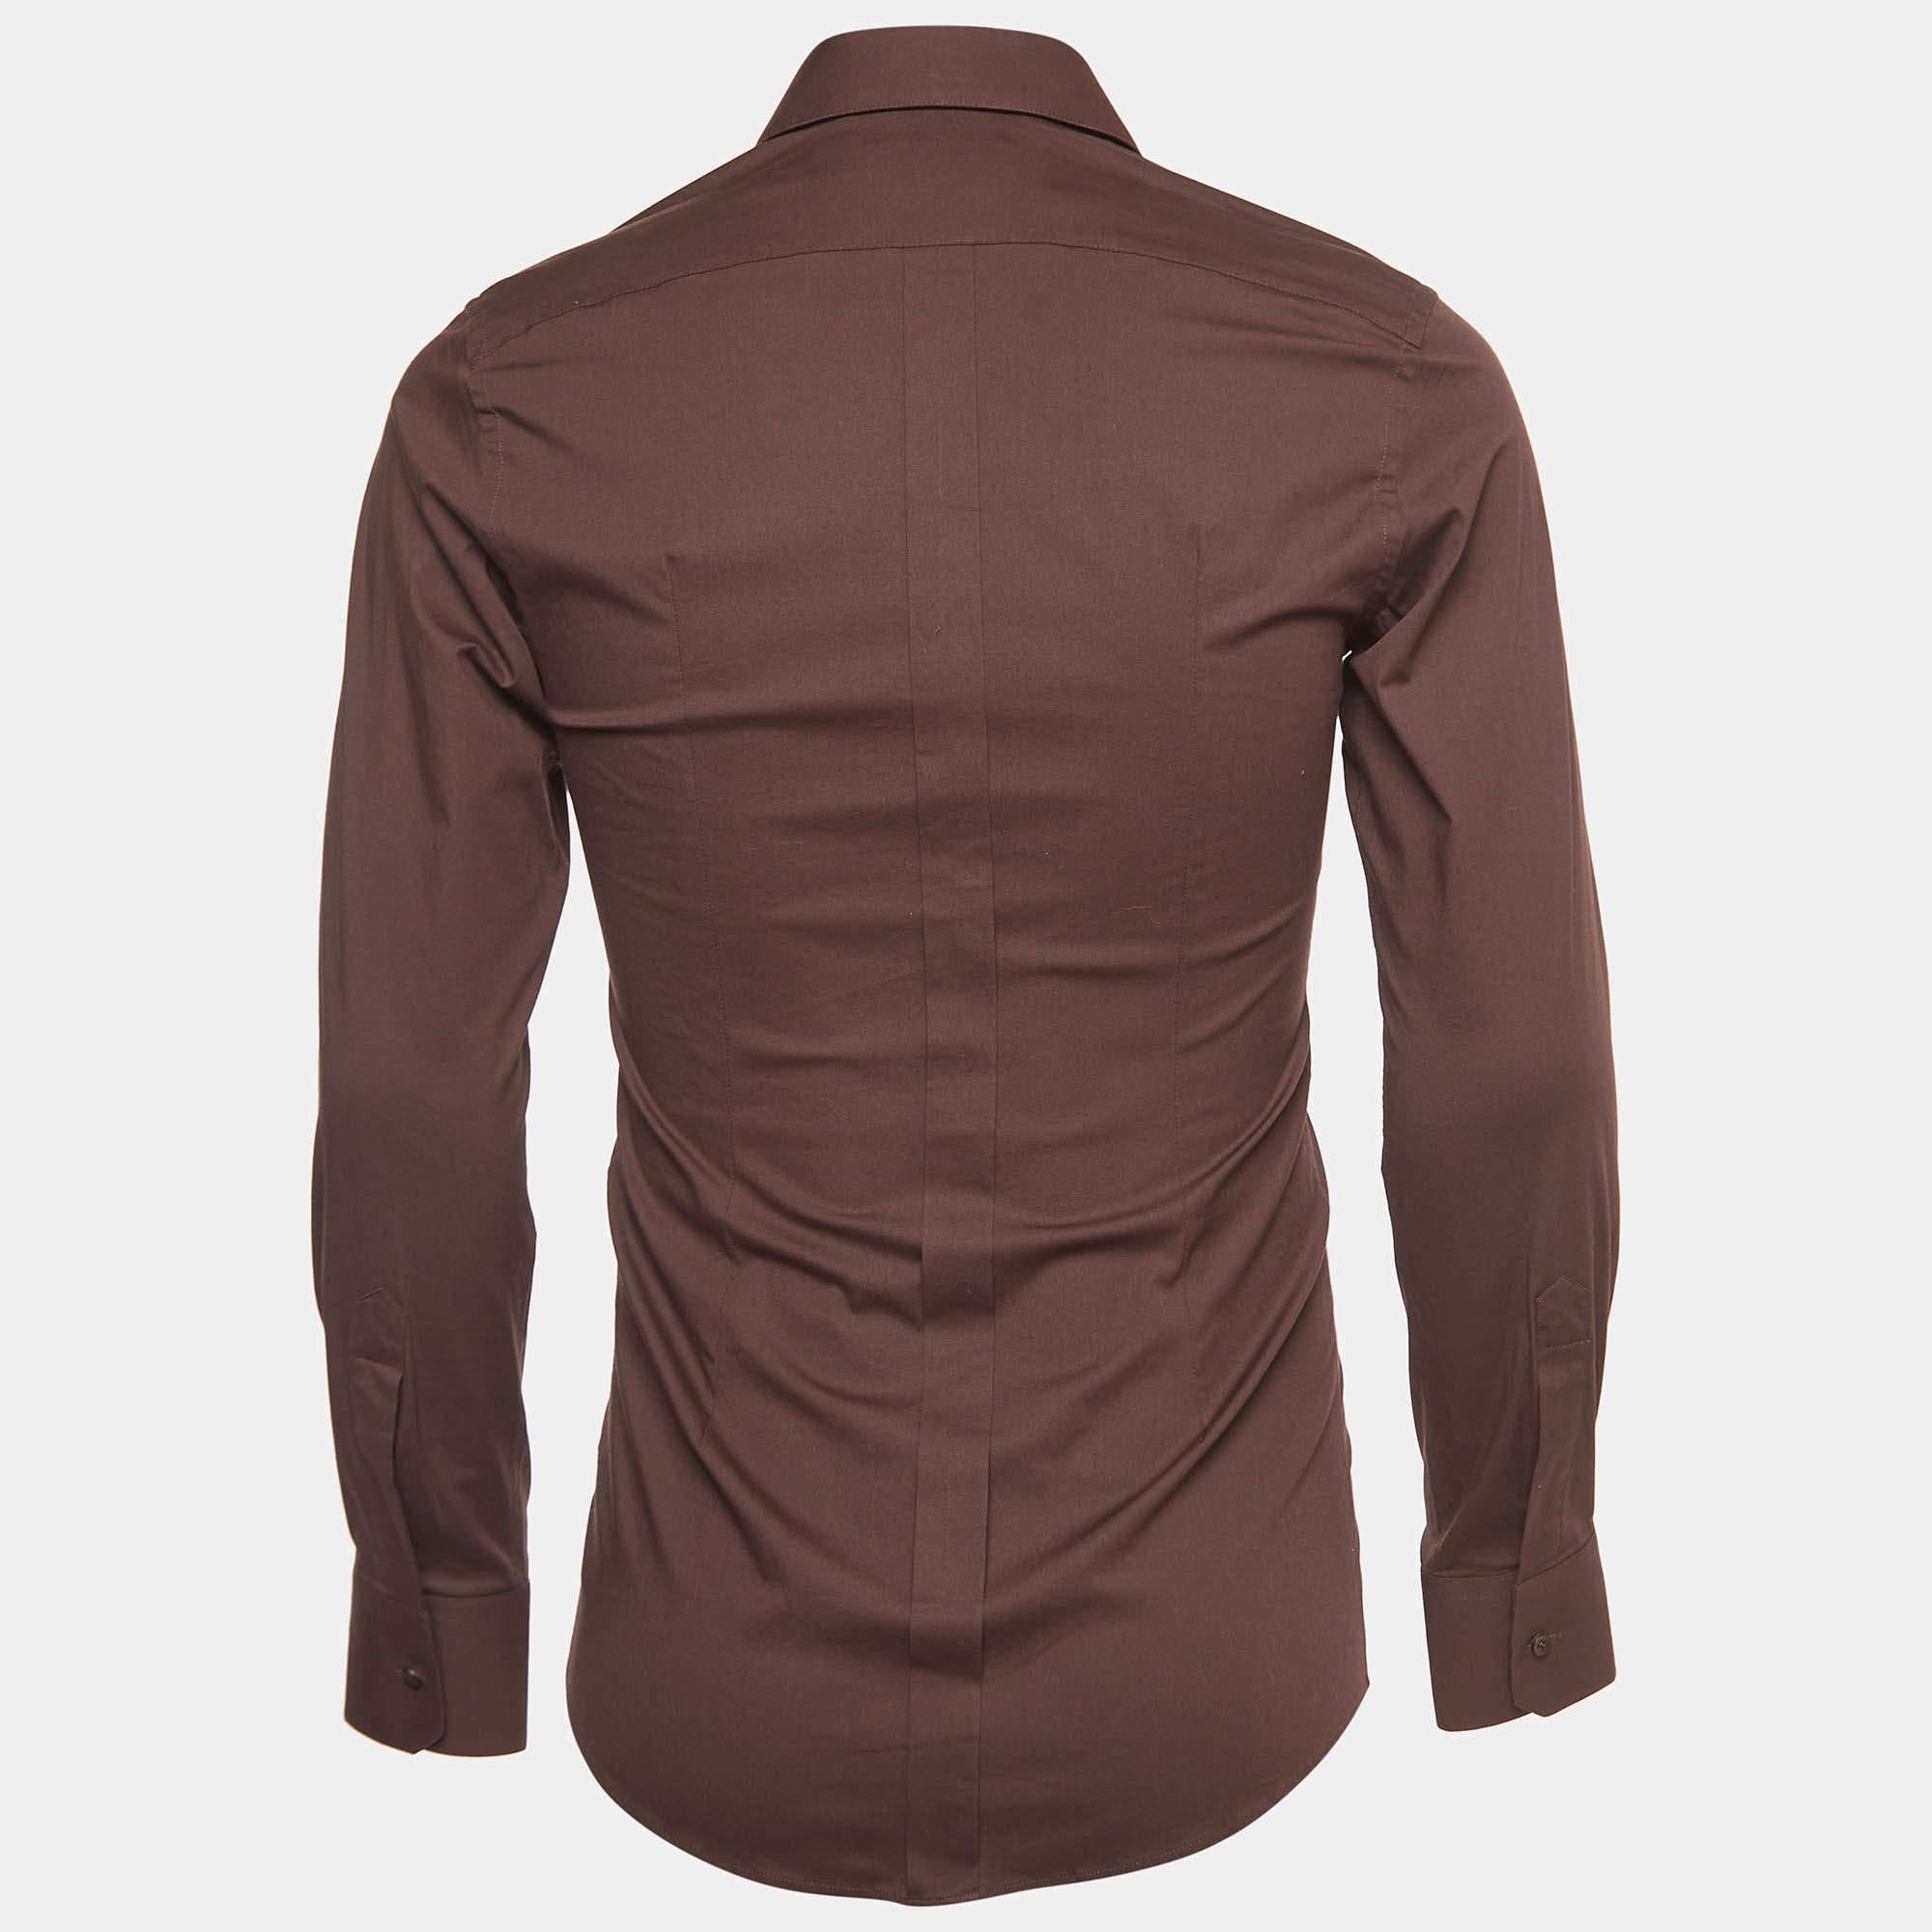 How fabulous does this designer shirt look! It is made of fine materials and features a fitted silhouette. Pair it with pants and loafers for a cool ensemble.

